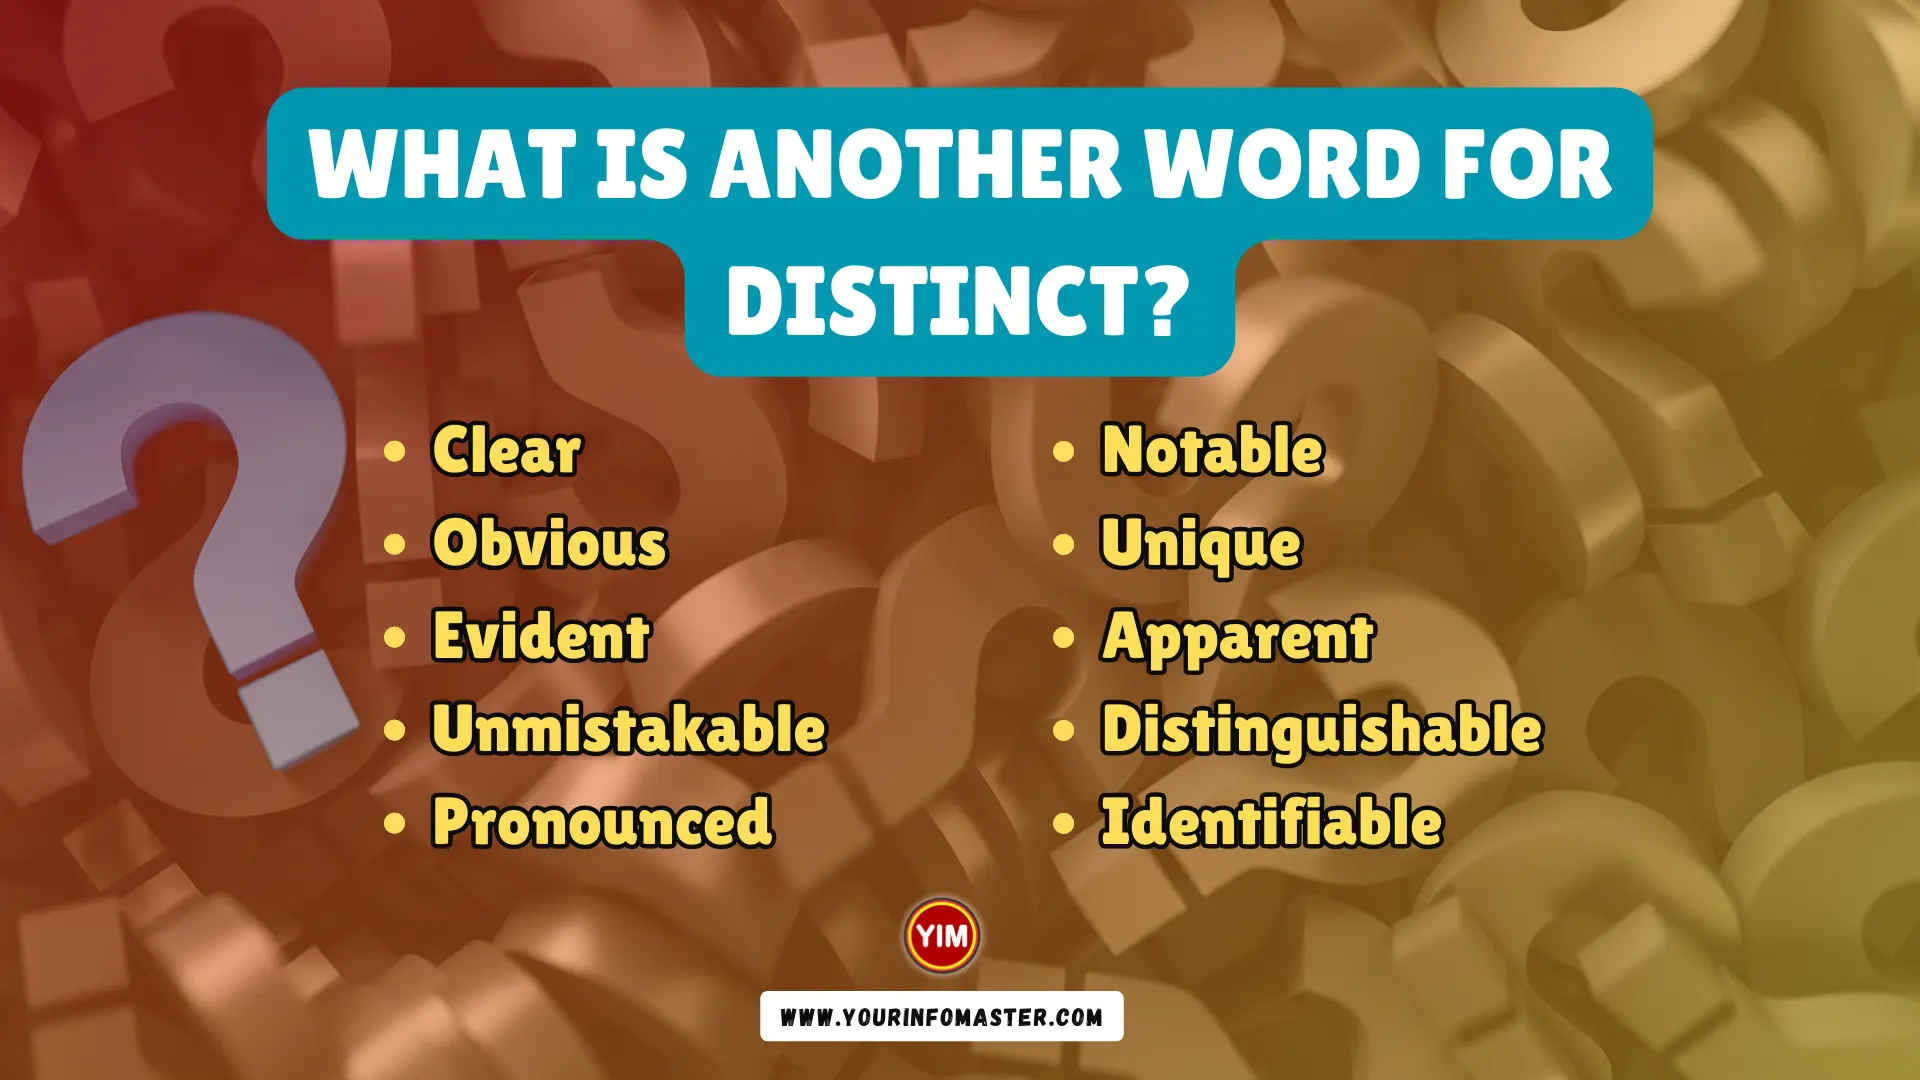 What is another word for Distinct